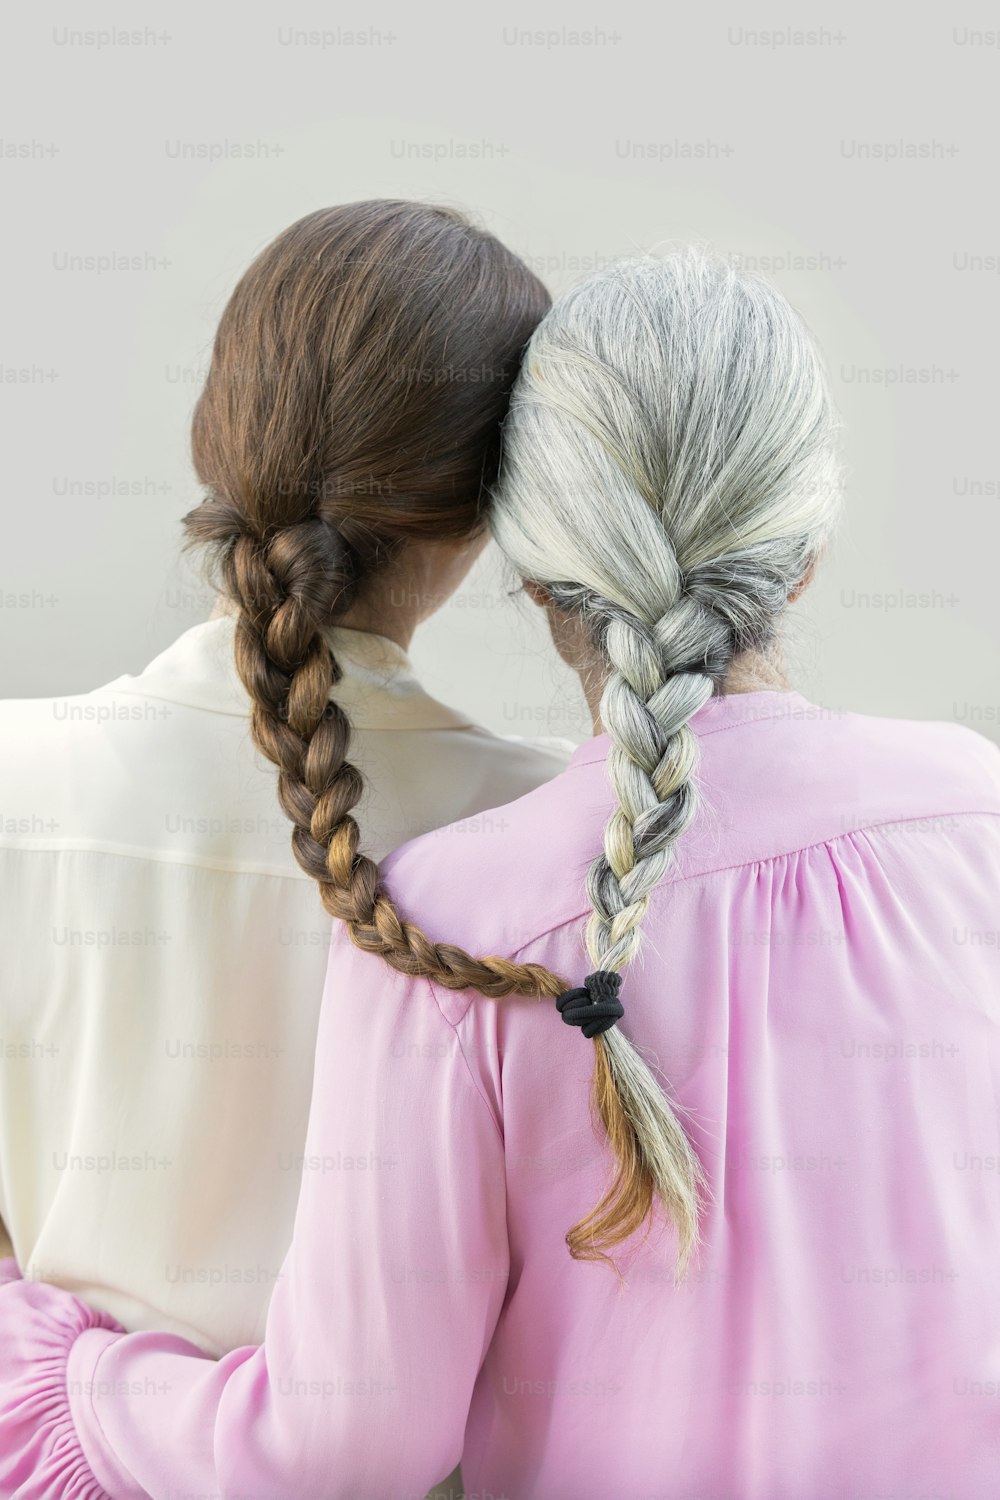 Red Ribbon Tied On Braided Hair High-Res Stock Photo - Getty Images